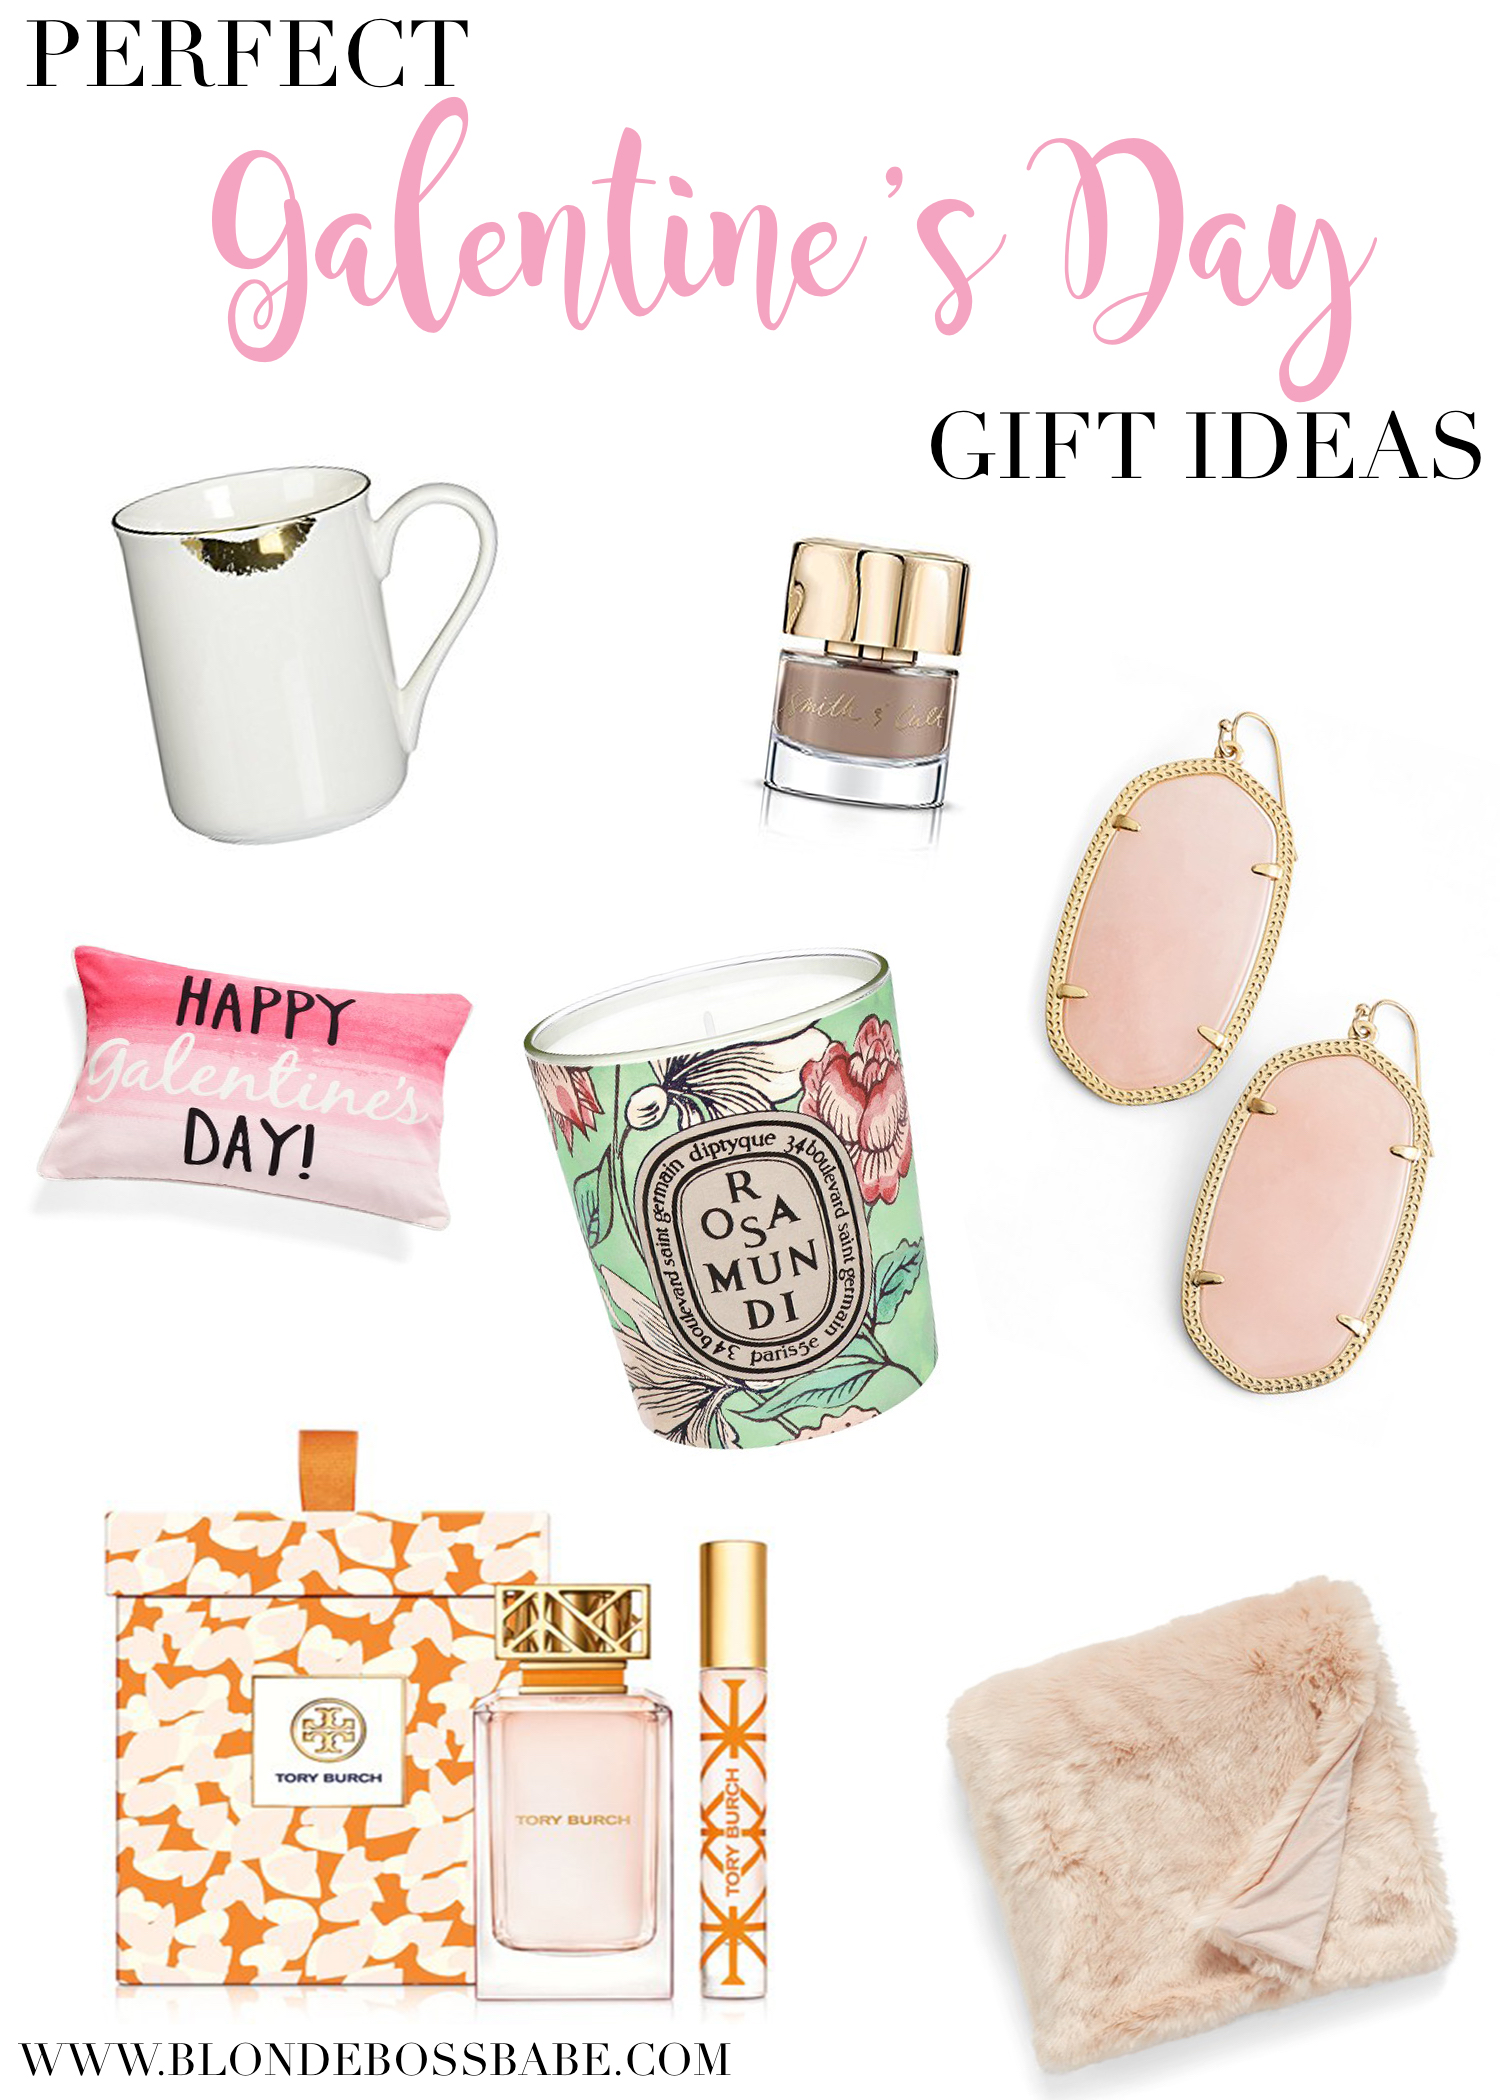 Top Gifts for Galentine's Day - Blonde Boss Babe